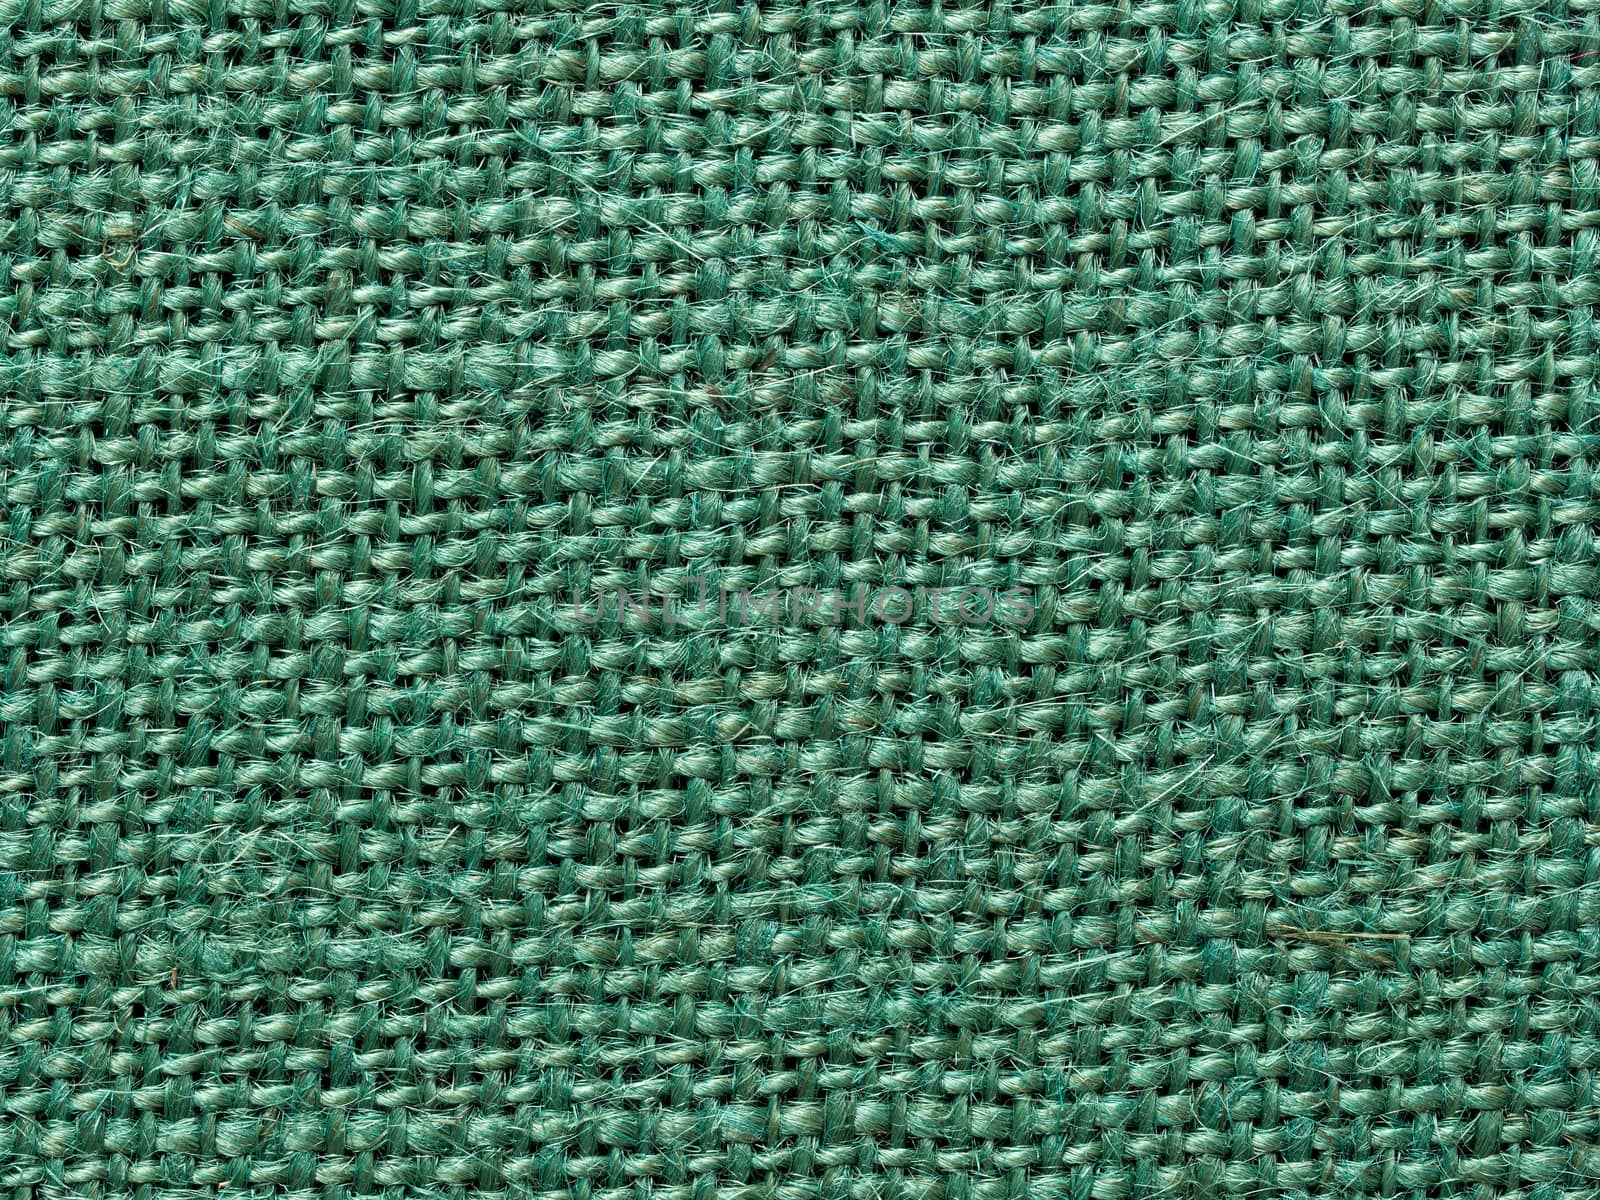 green burlap fabric texture background by zkruger